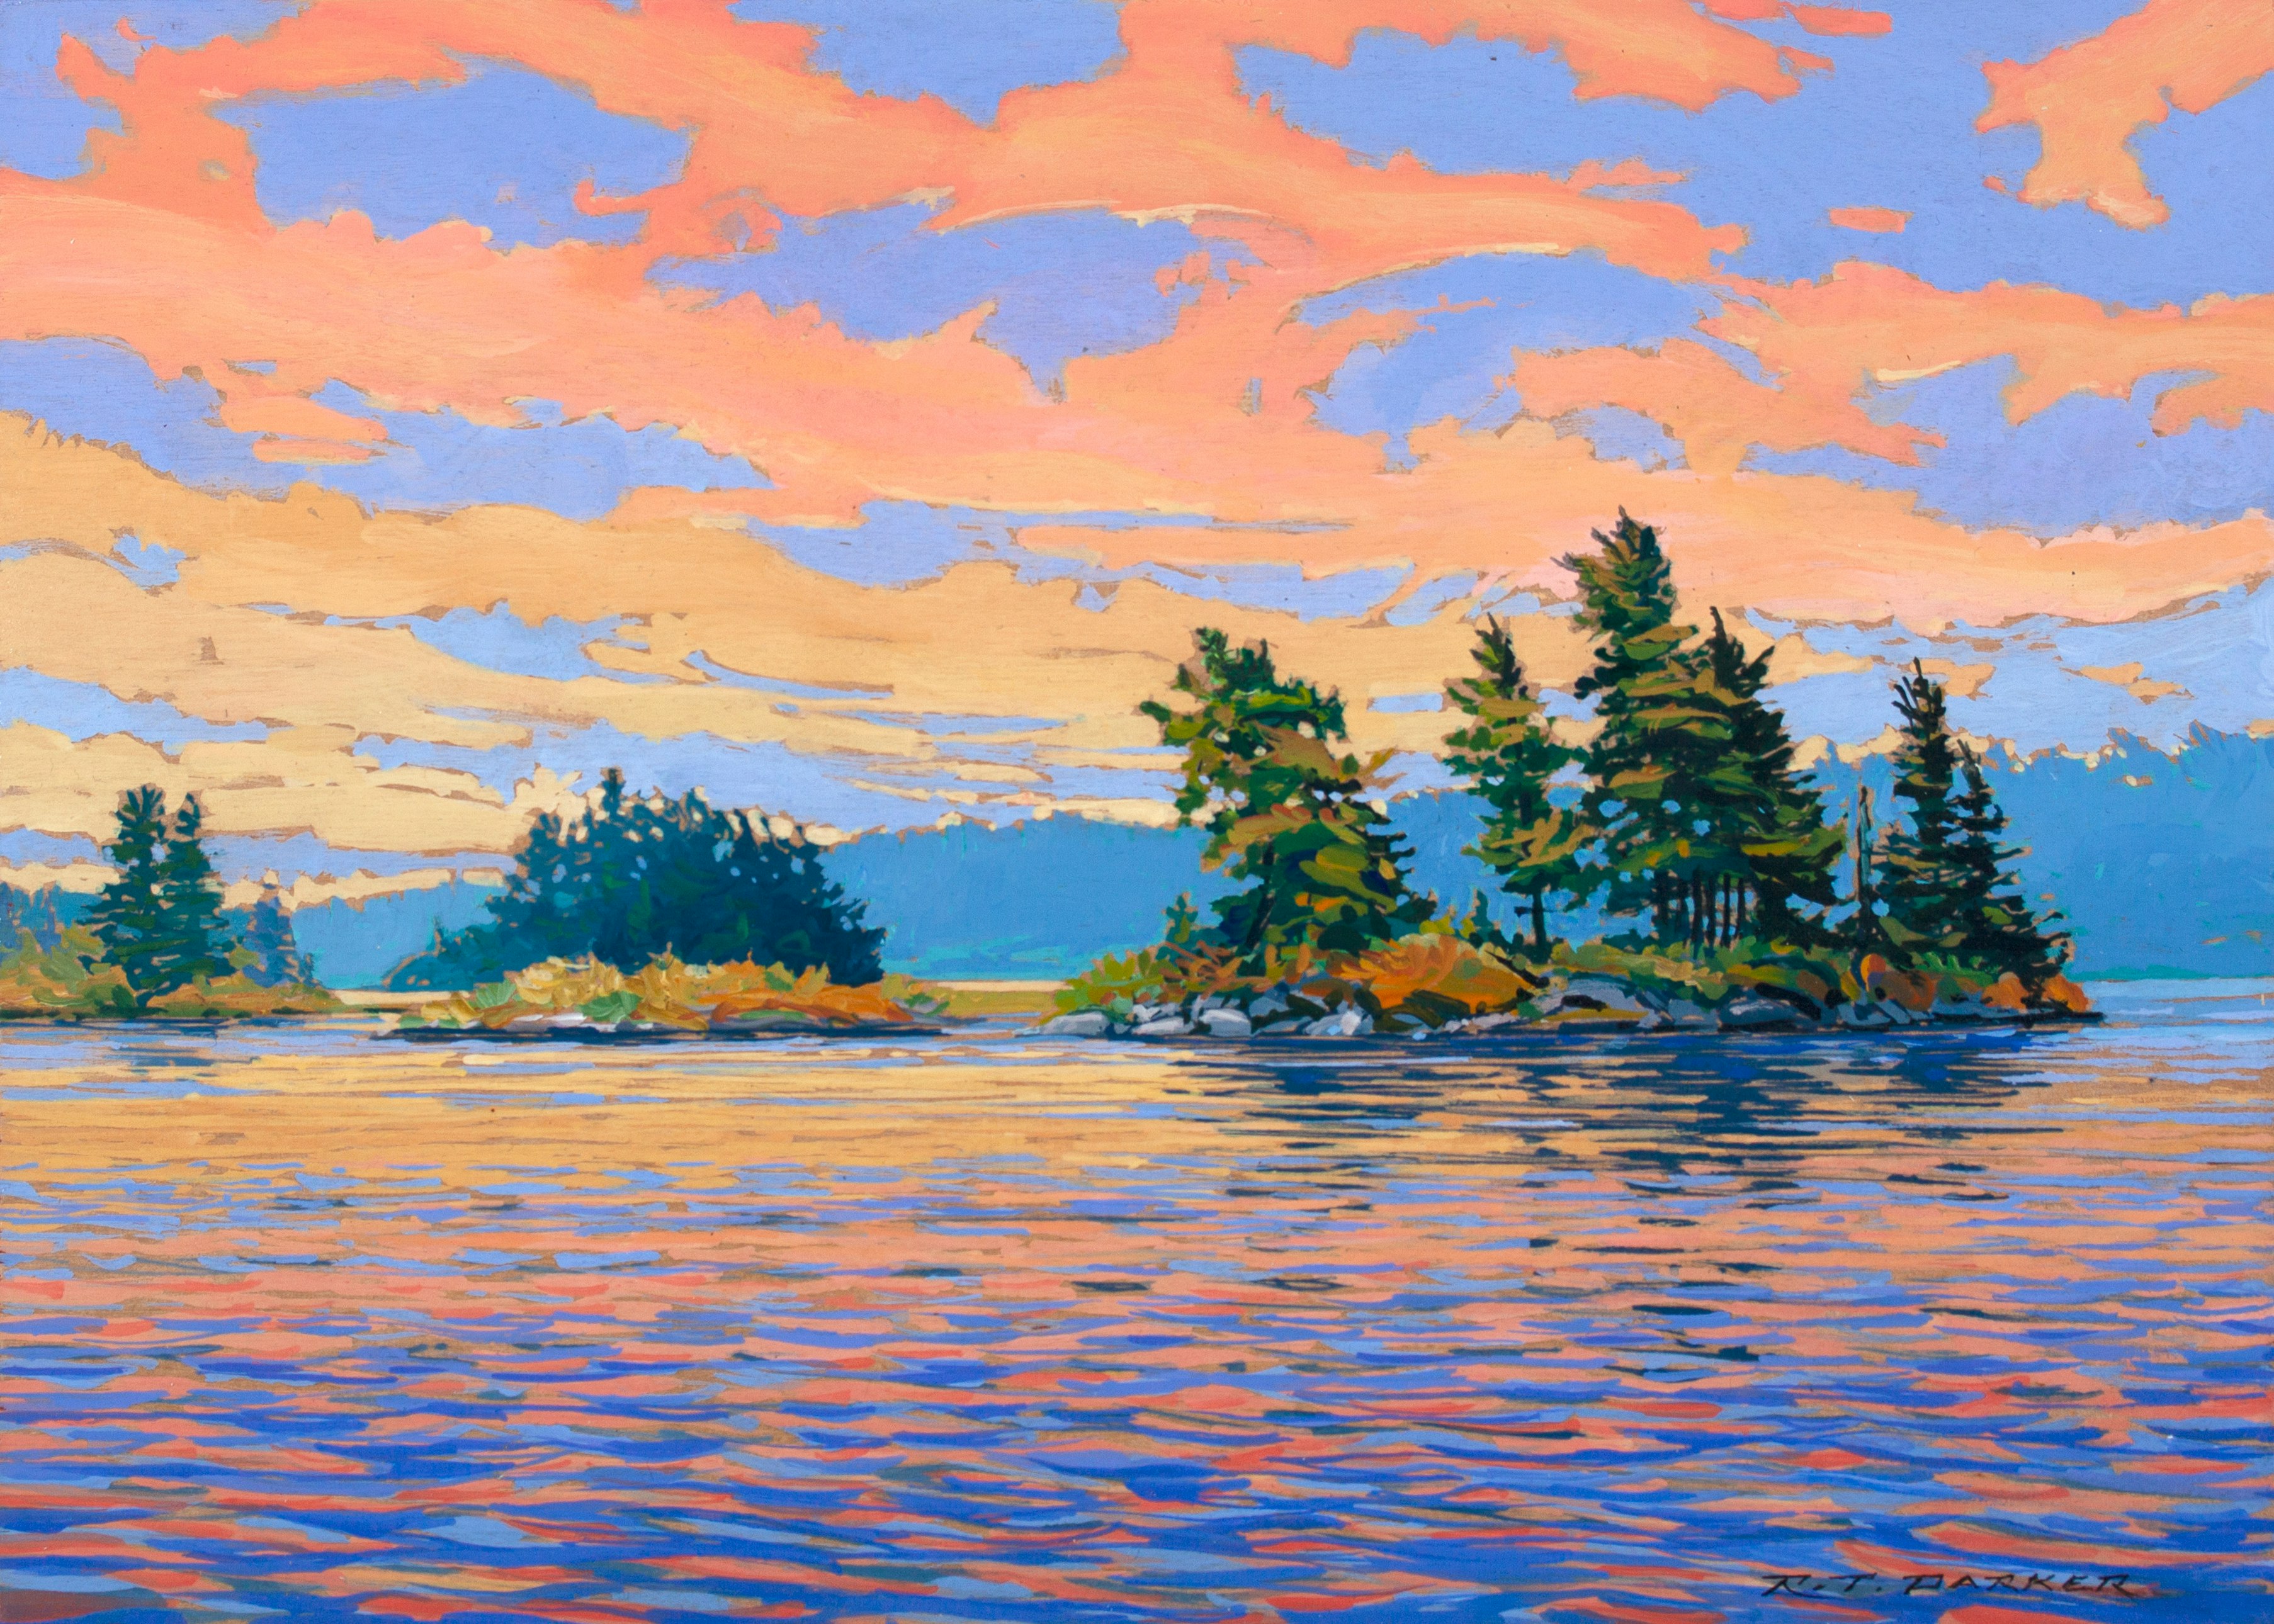 Northwest Moore Bay by Randolph Parker, 2020 Acrylic on Panel - (10x14 in)